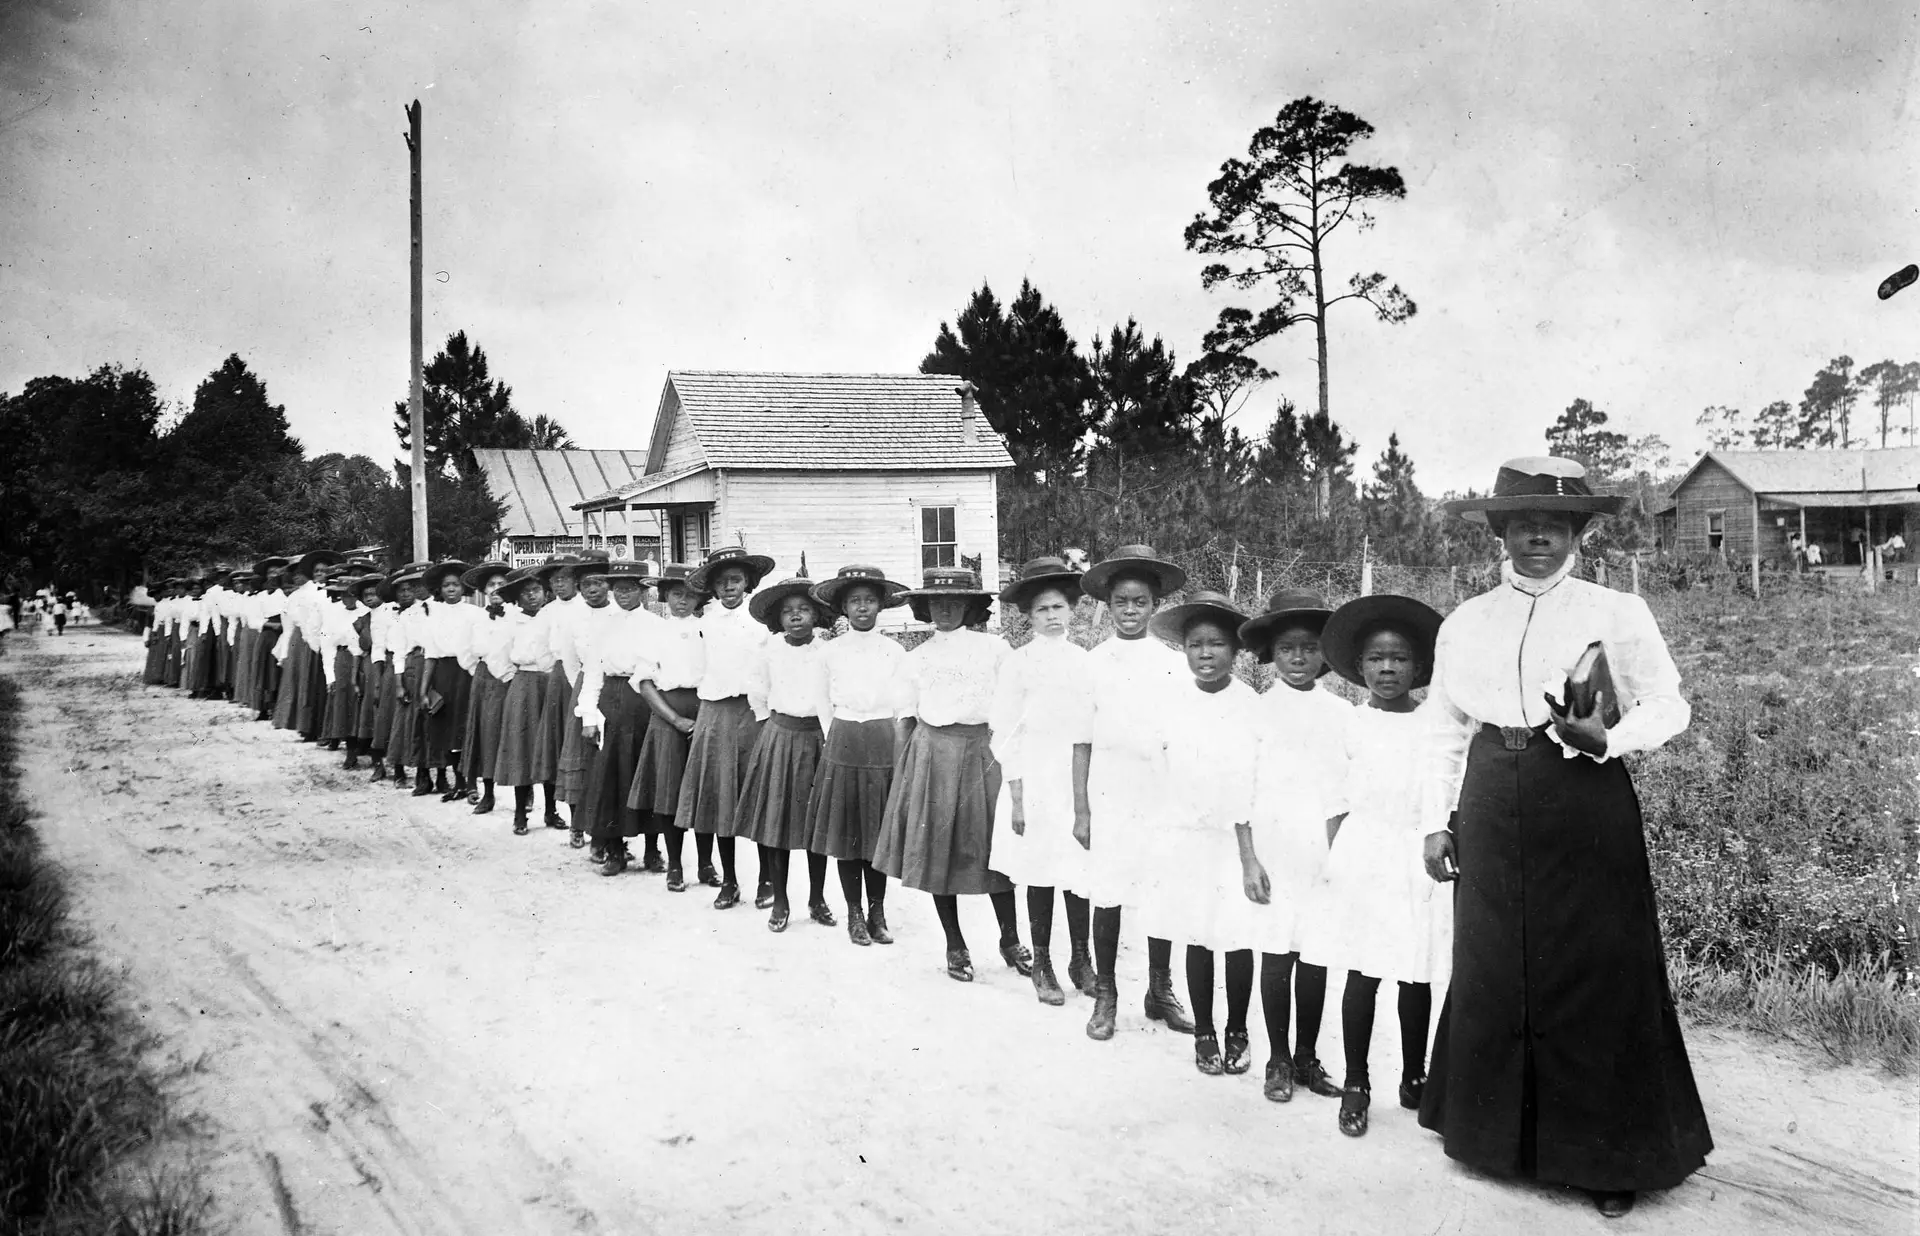 Mary McLeod Bethune with a Line of Girls from the School.